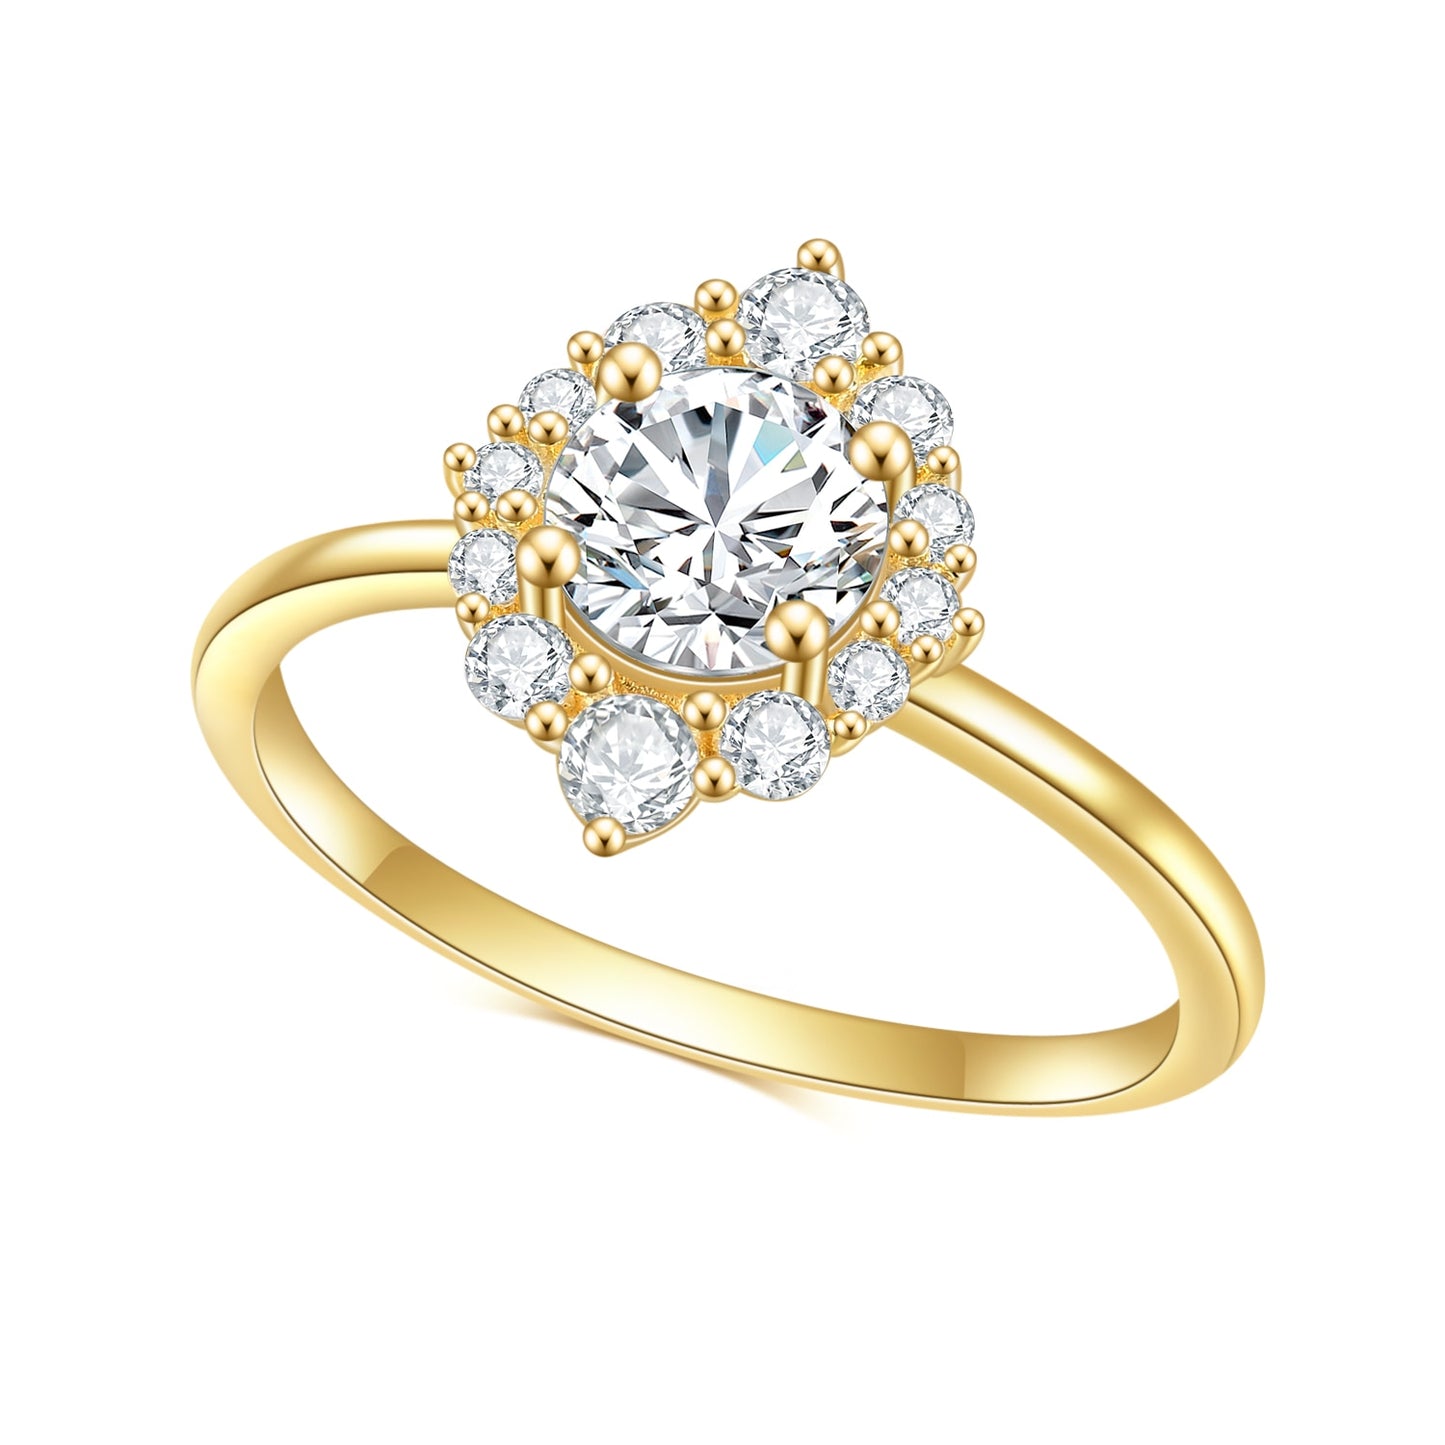 A gold round cut ring with a oval halo around it.